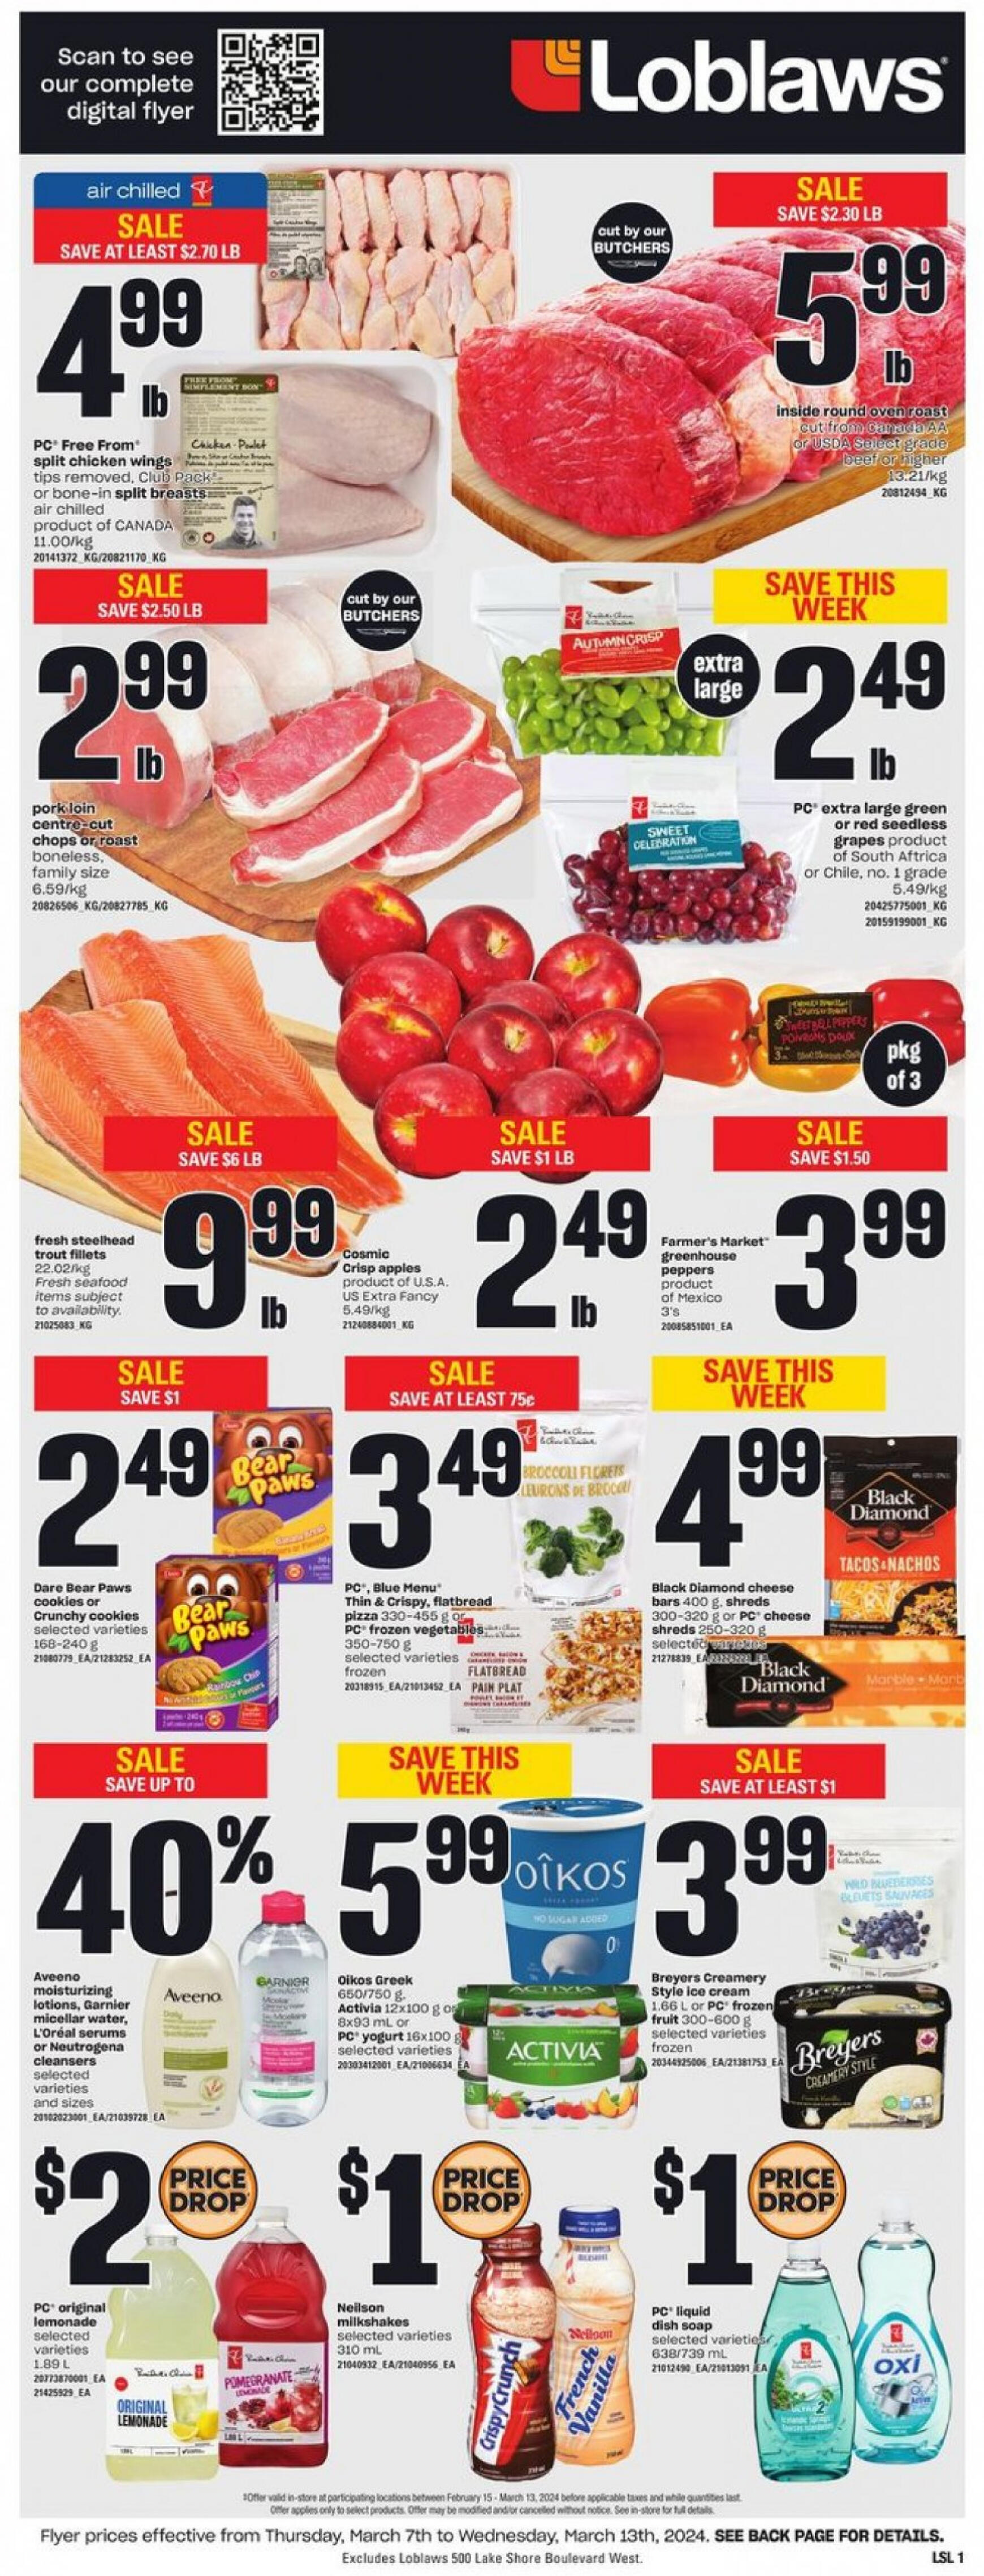 loblaws - Loblaws valid from 07.03.2024 - page: 5